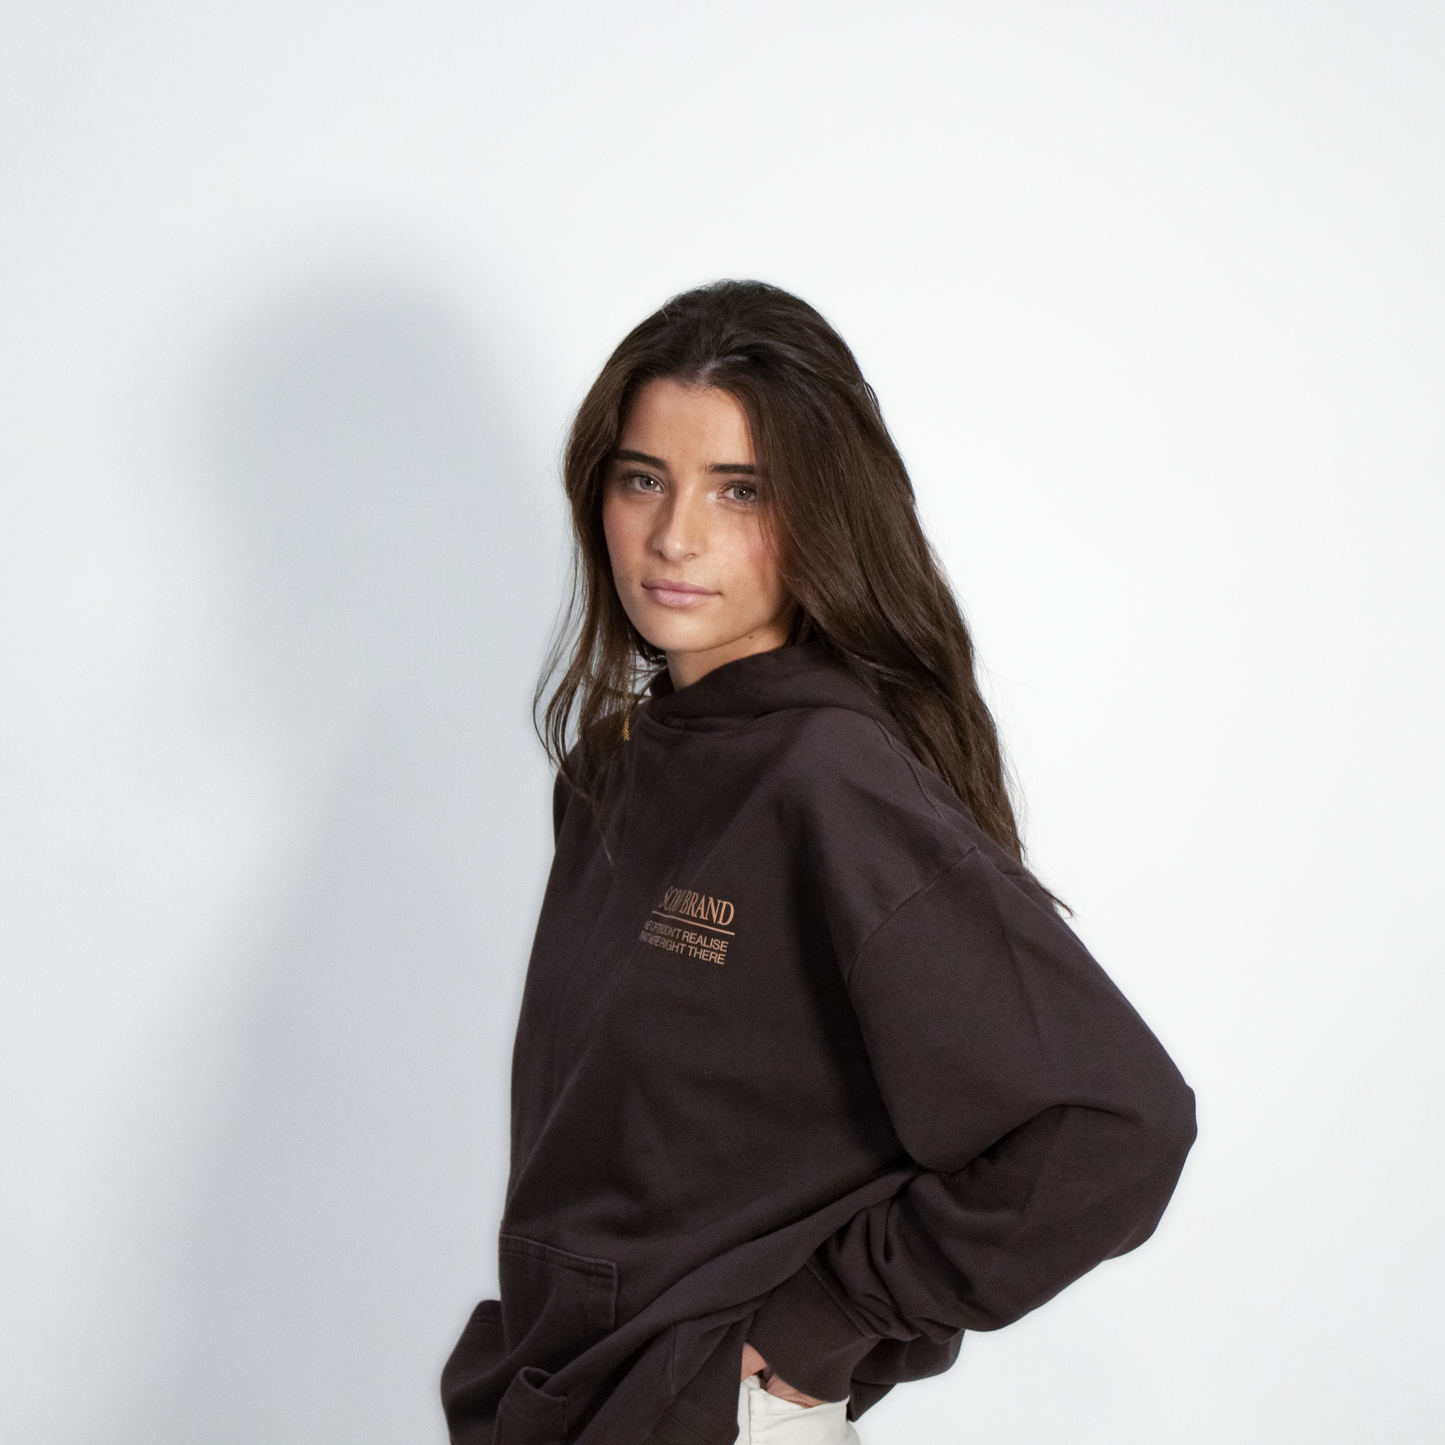 HICKORY BROWN "RIGHT THERE" OVERSIZED HOODIE